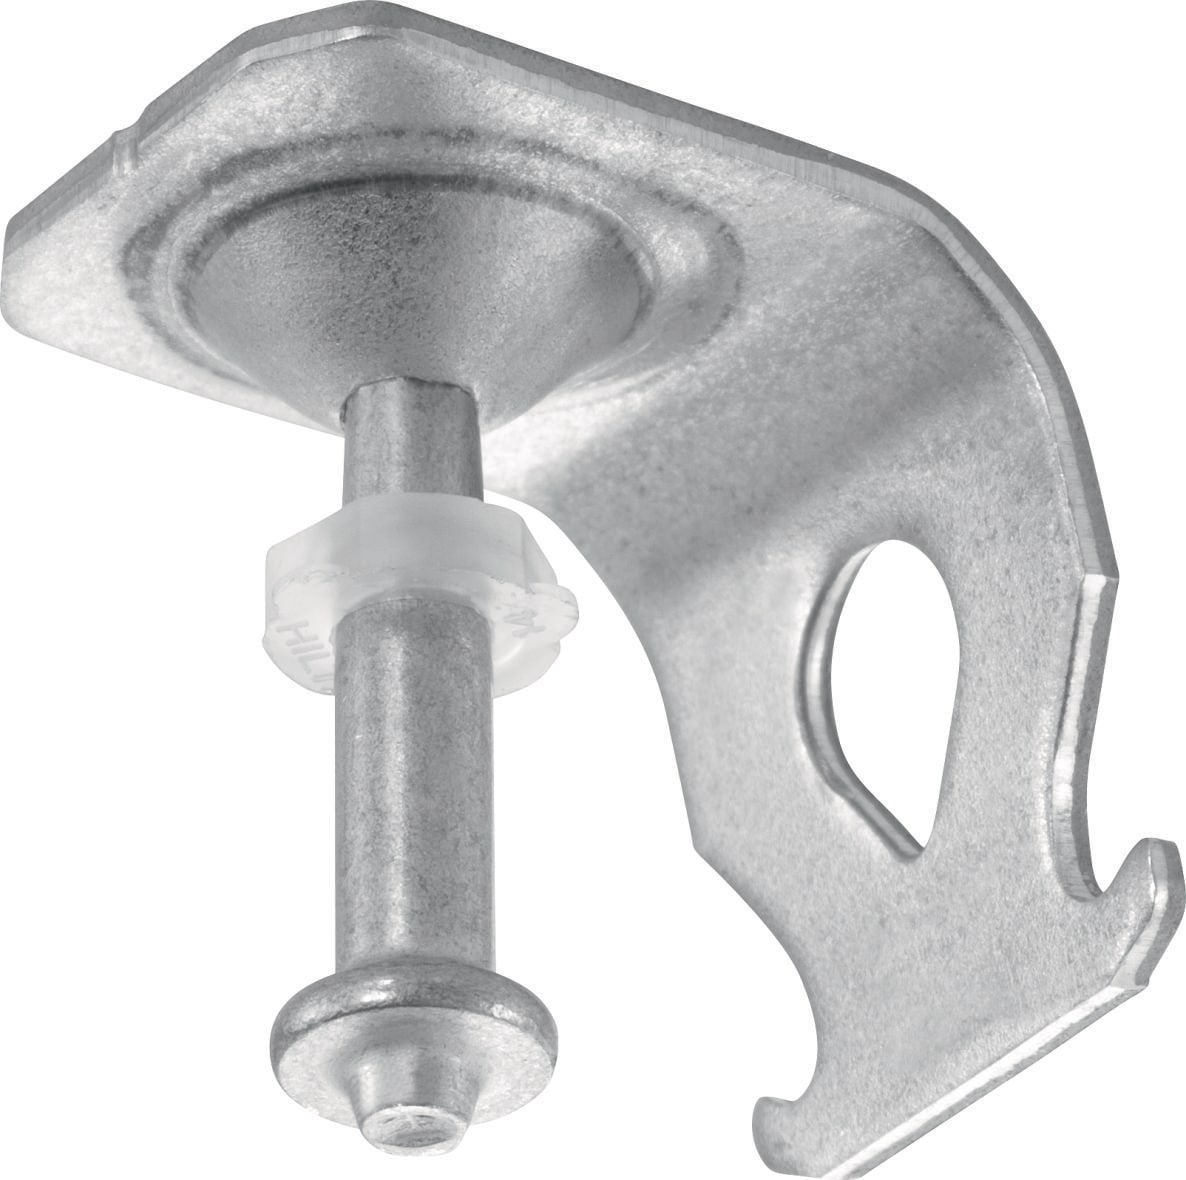 X-CX ALH Ceiling clip with nail - Fastening elements - Hilti USA